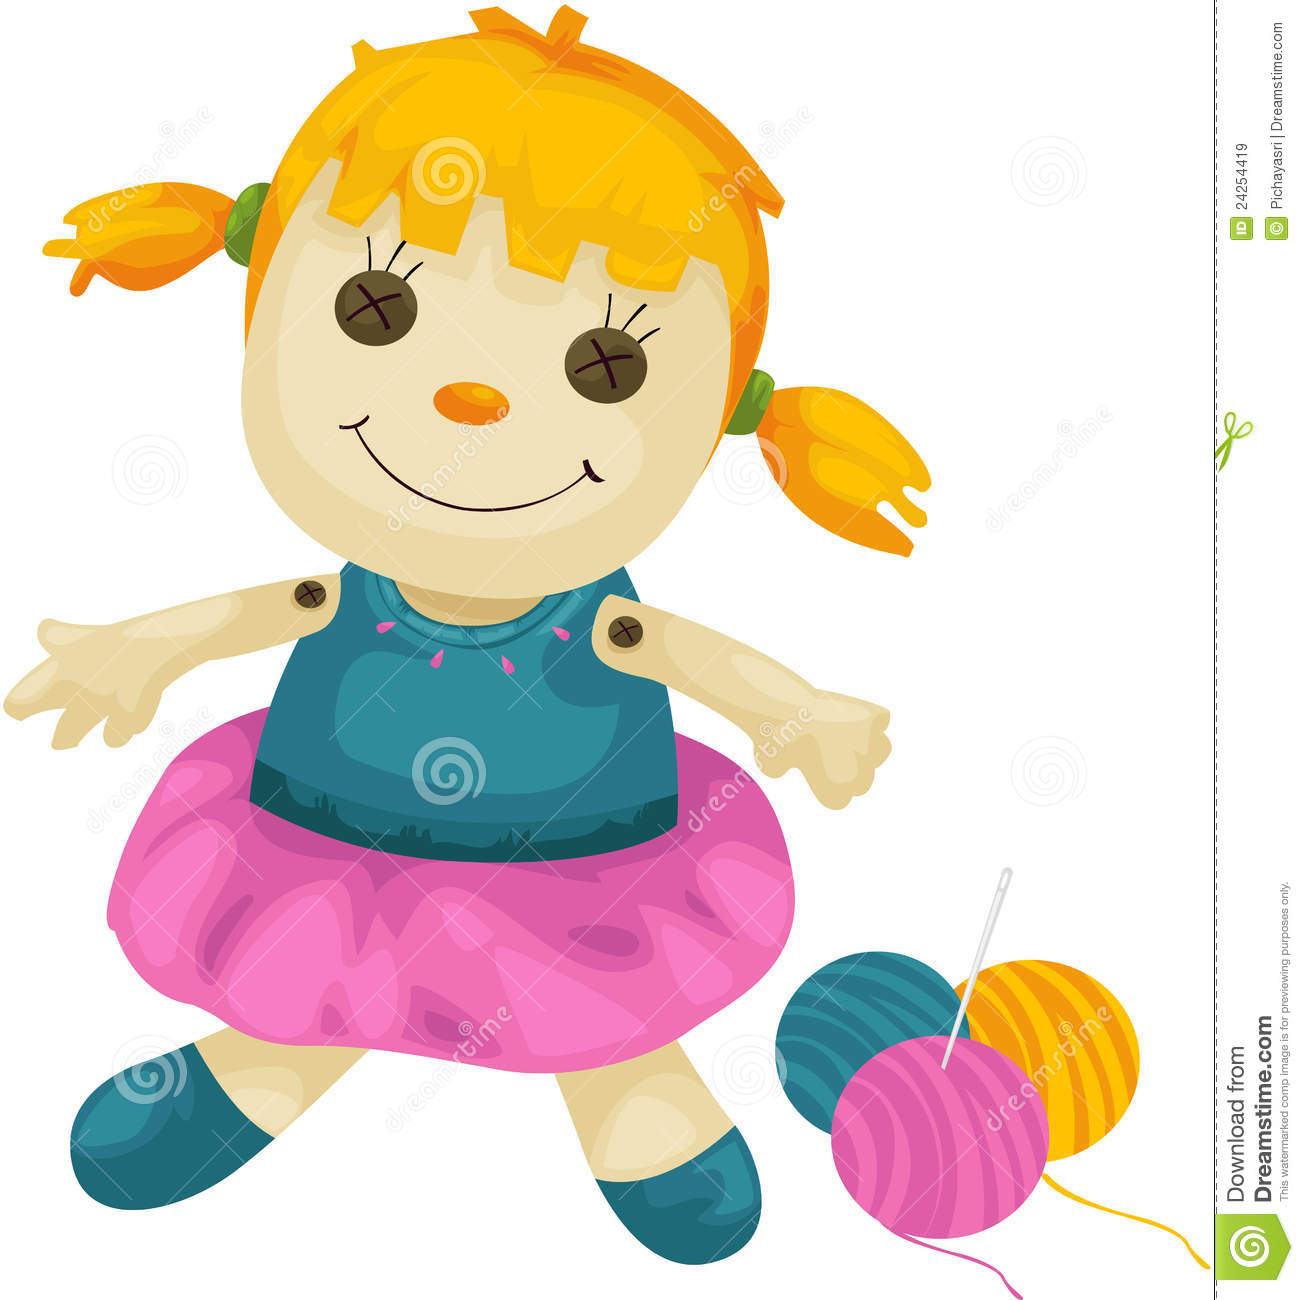 doll clipart images - photo #36